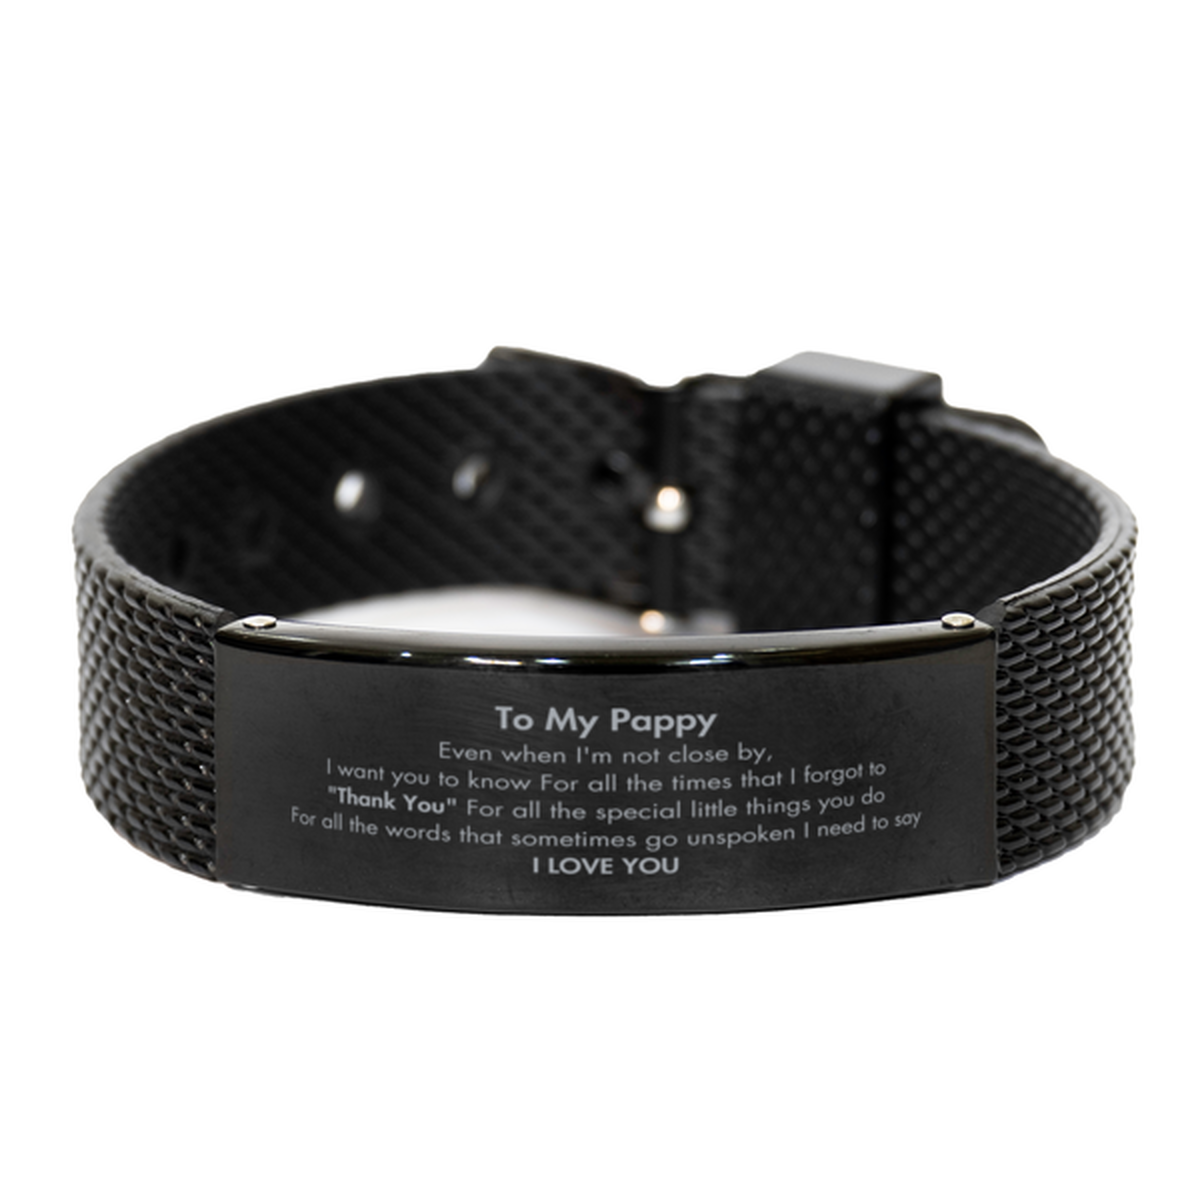 Thank You Gifts for Pappy, Keepsake Black Shark Mesh Bracelet Gifts for Pappy Birthday Mother's day Father's Day Pappy For all the words That sometimes go unspoken I need to say I LOVE YOU